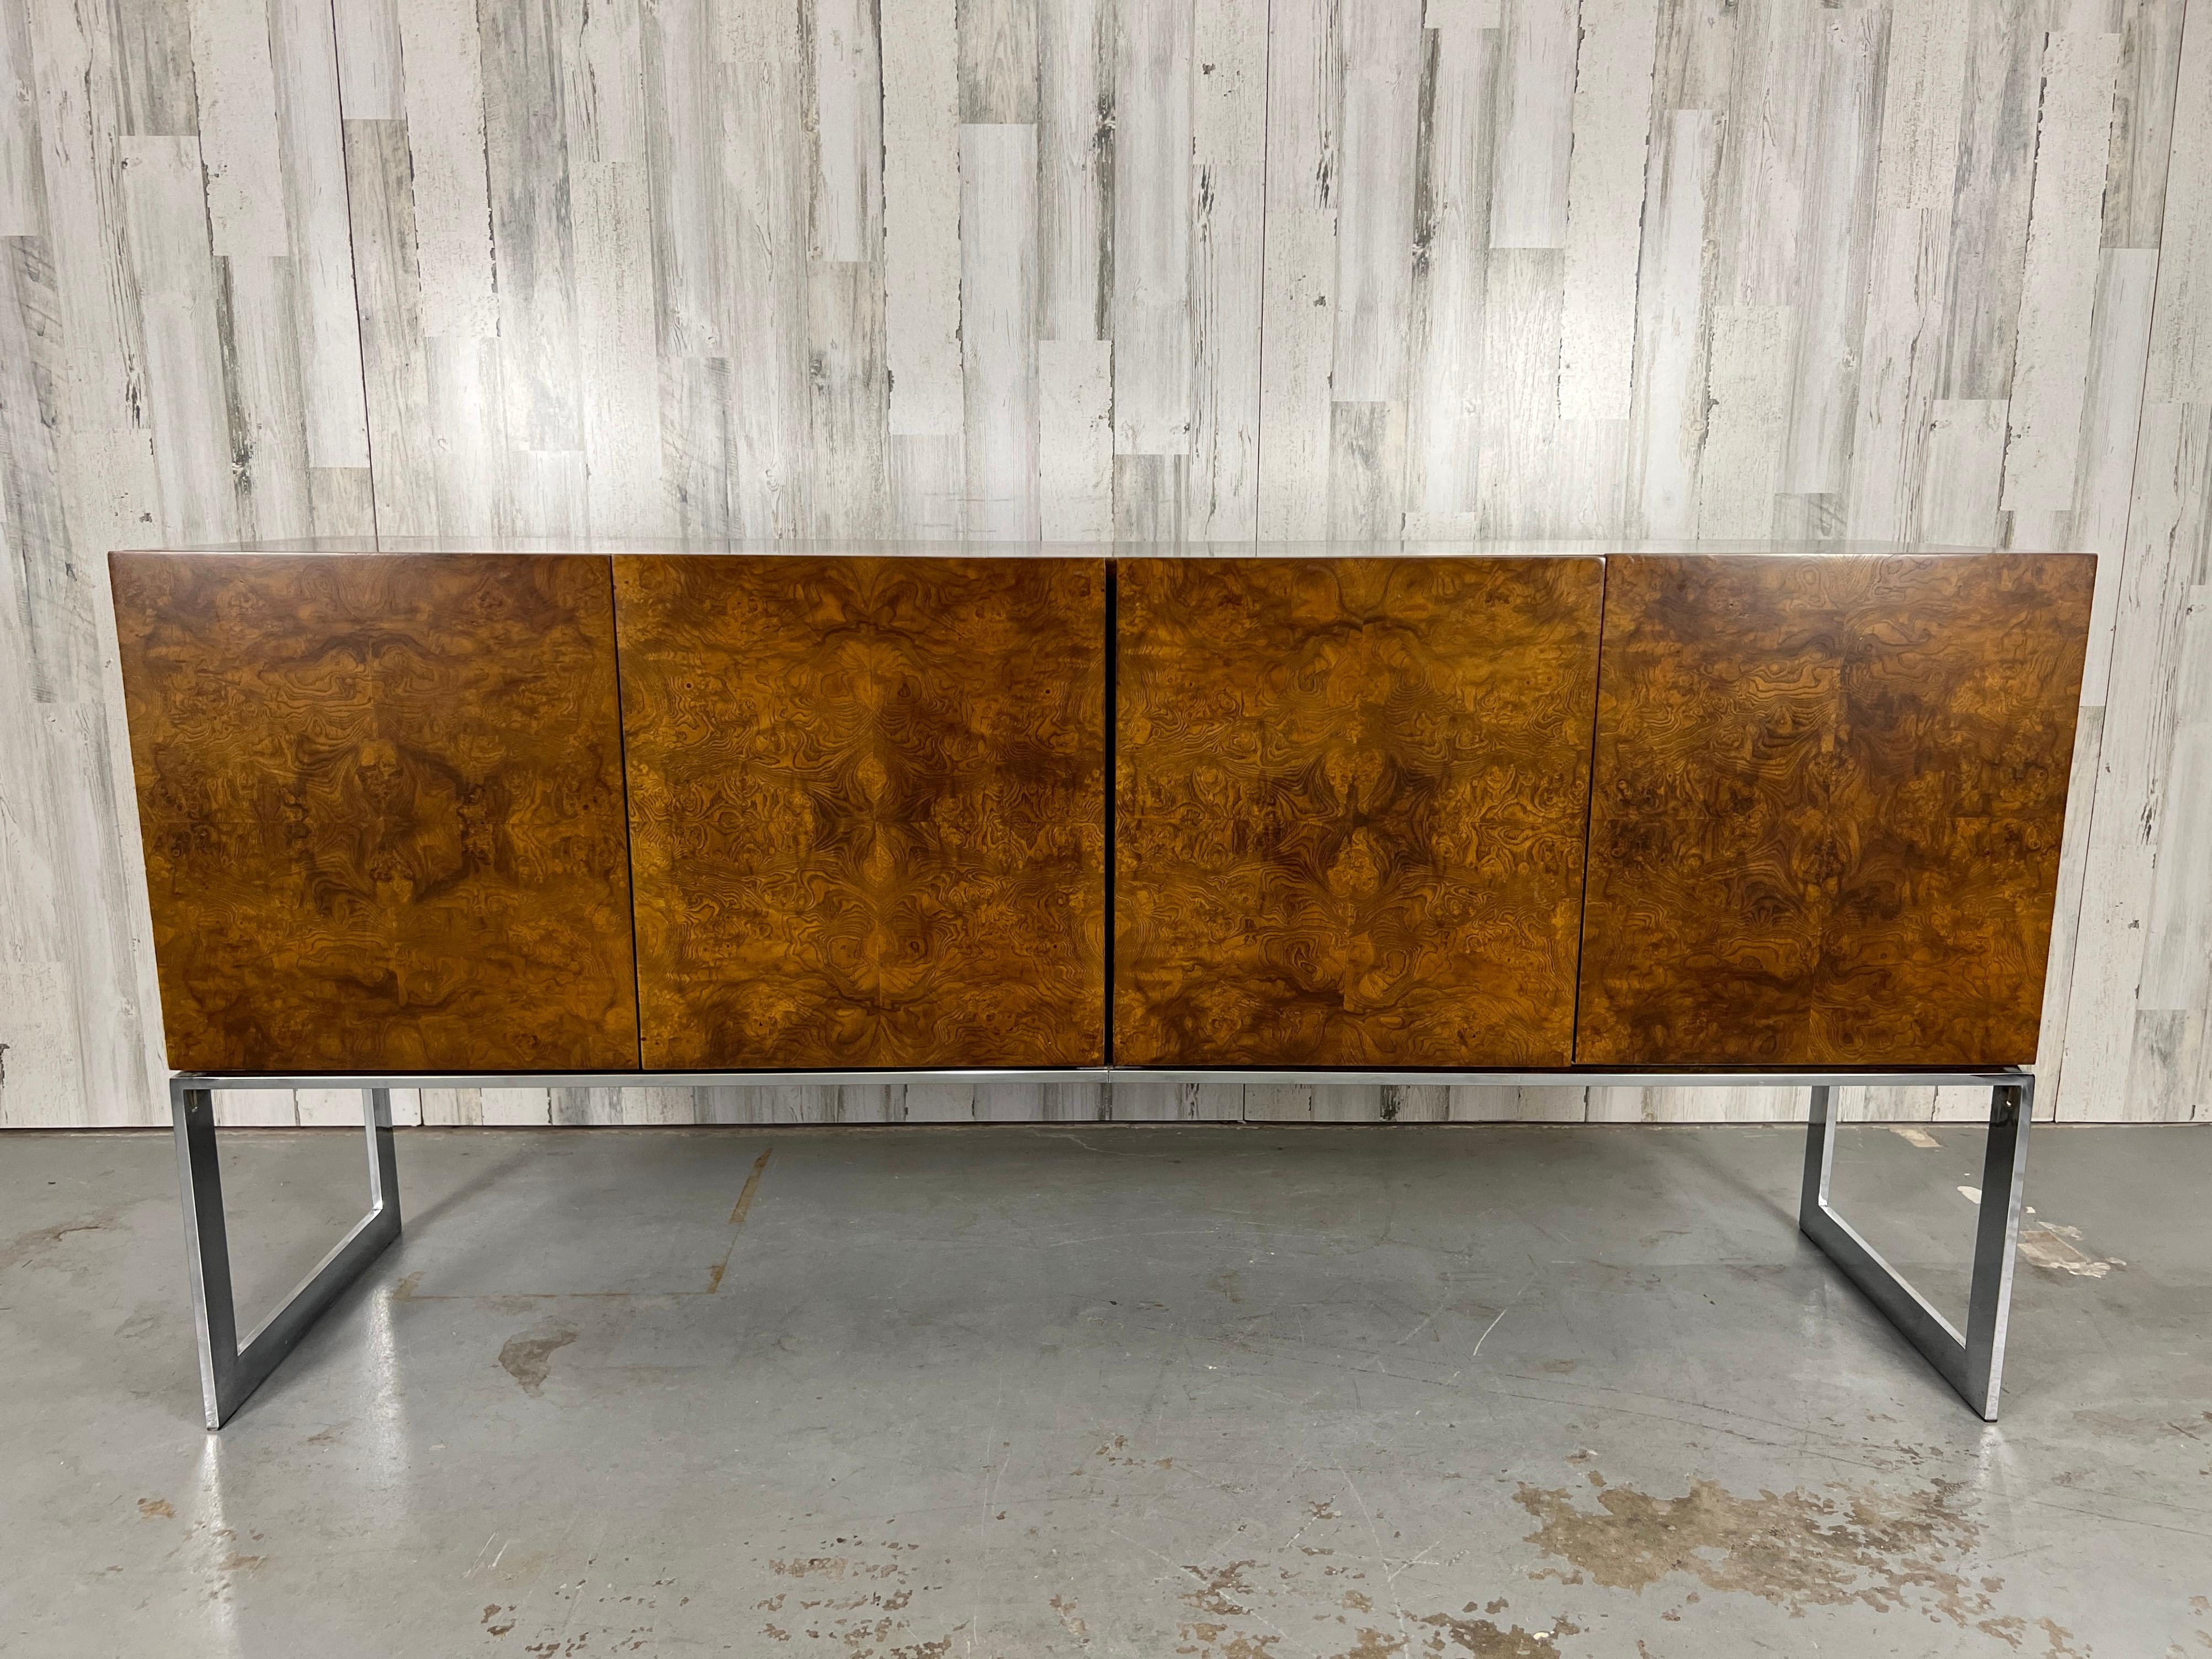 Burl wood covered credenza a top sturdy chrome legs that give this the appearance of floating above the floor. Interior has all the original drawers and shelves including one smoked glass shelf. Drawers still retain the original burnt orange velvet